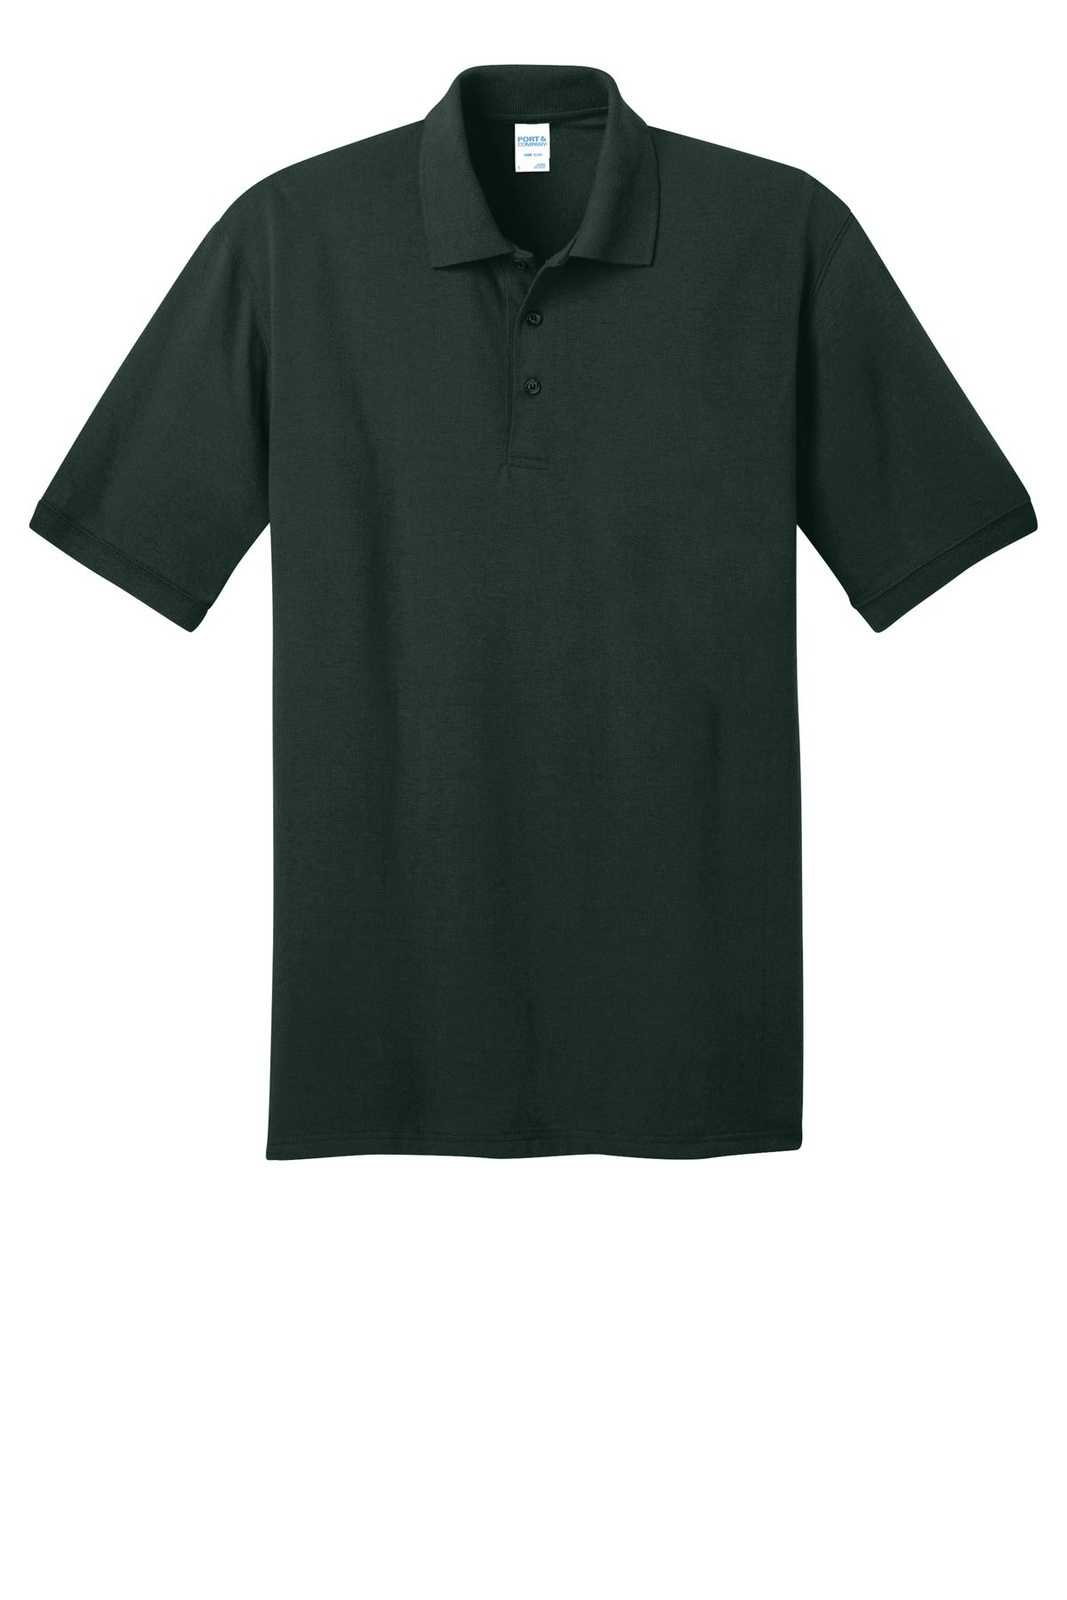 Port &amp; Company KP55T Tall Core Blend Jersey Knit Polo - Dark Green - HIT a Double - 3